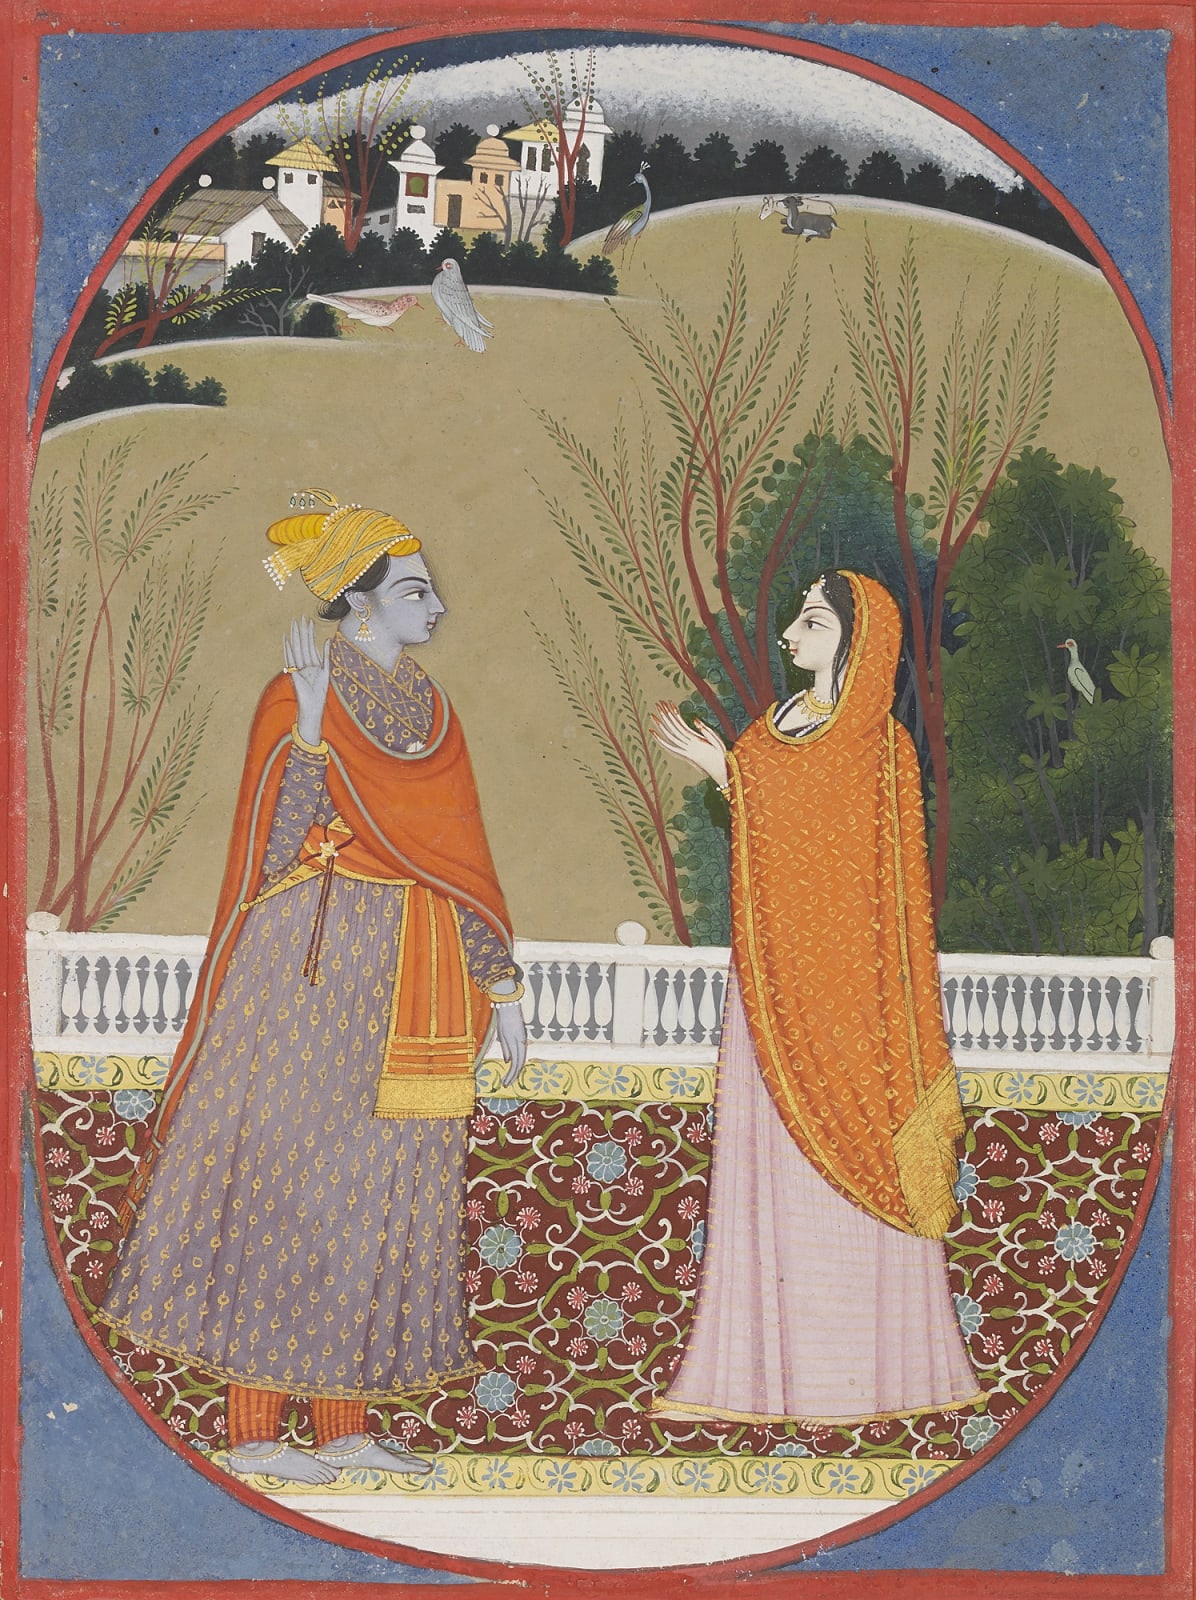 A Painting from a Barahmasa series - The month of Magha (January/February), Garhwal, 1780-90